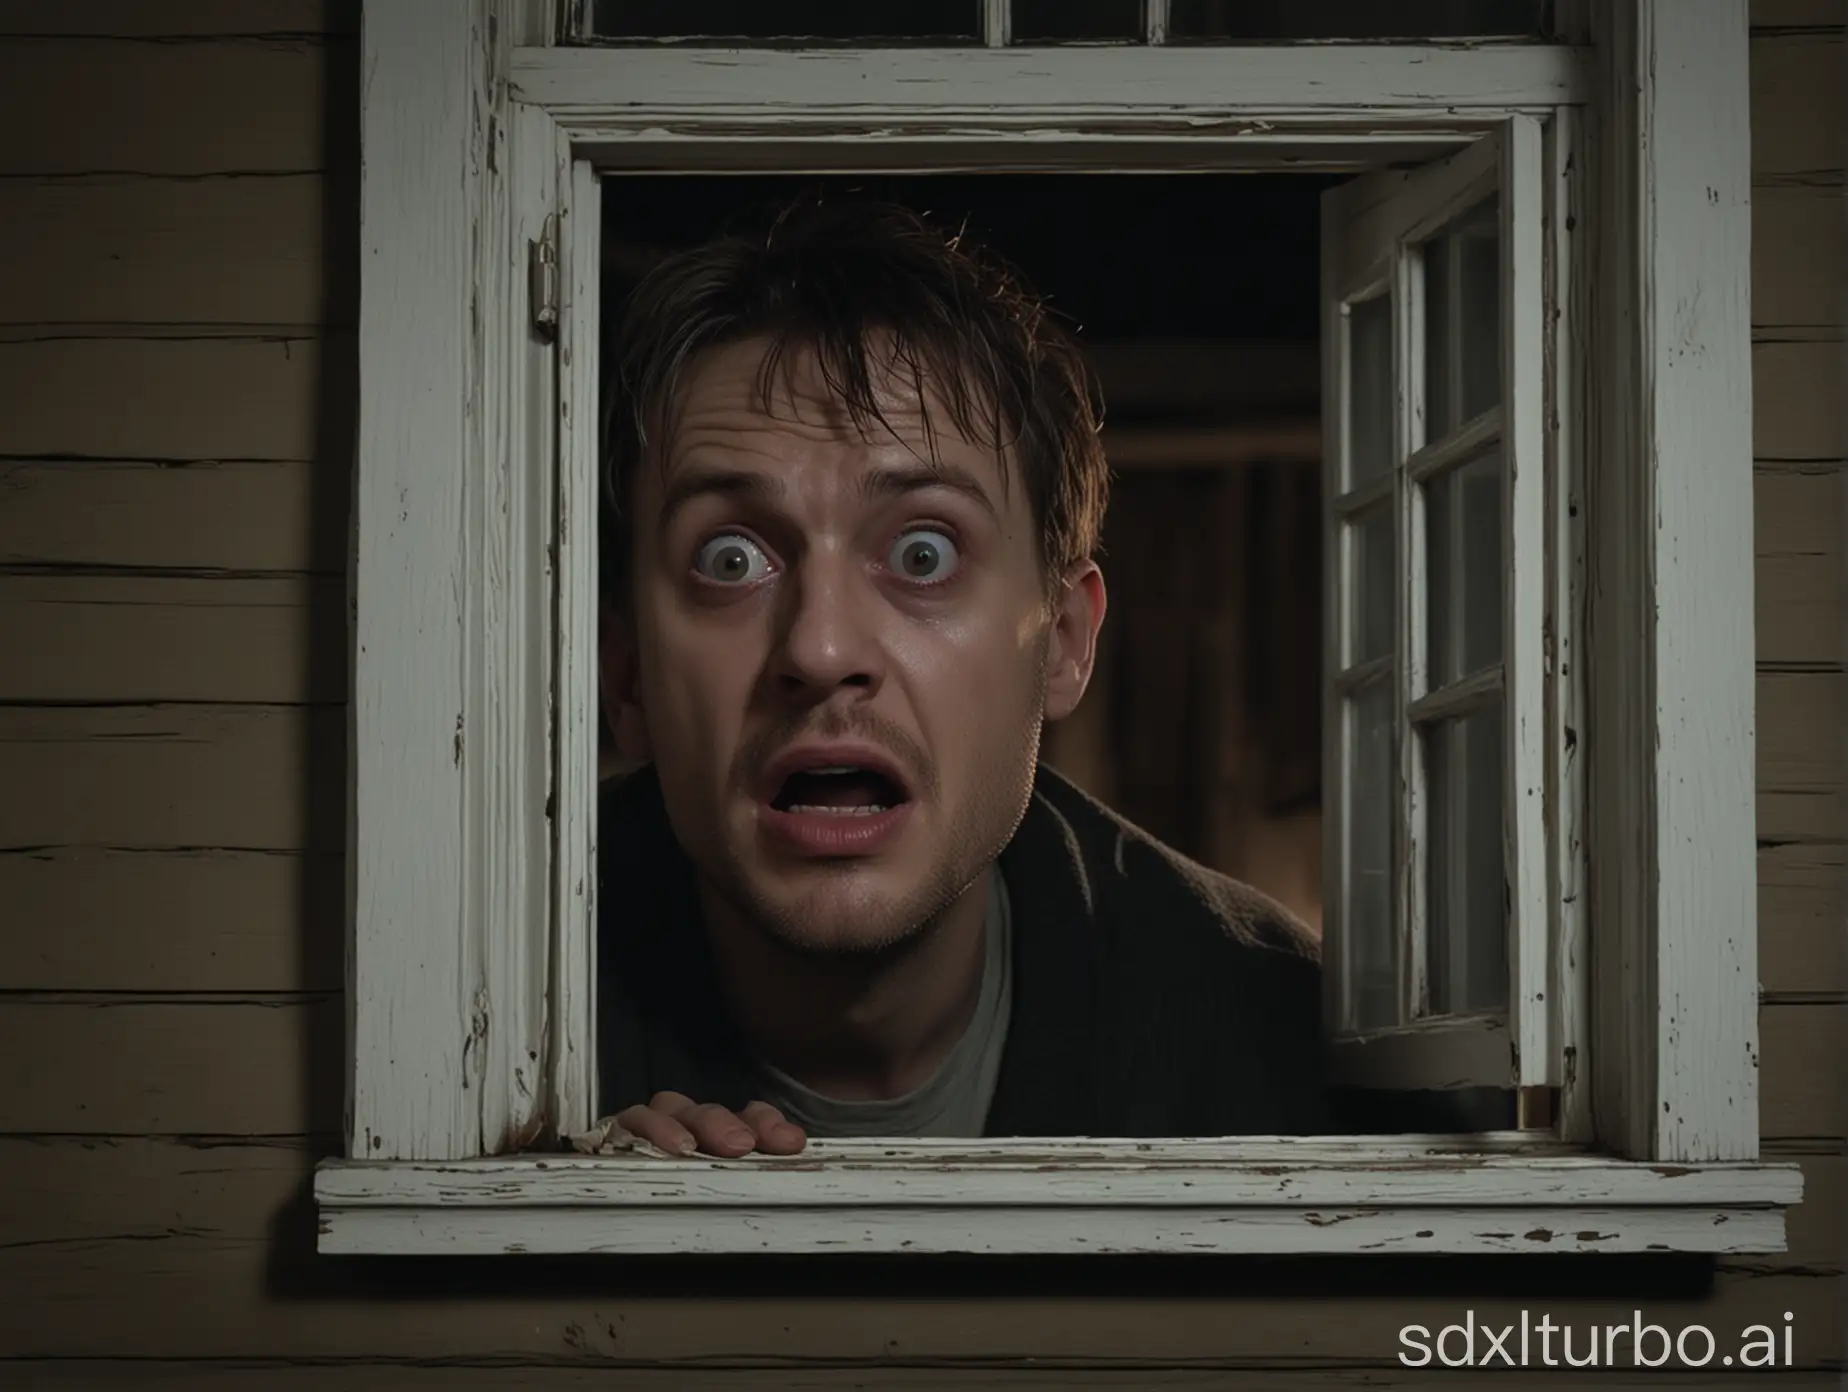 Create a square, 1:1 aspect ratio, high definition, image of a true scary home alone story. The image must be photorealistic, scary, show a worried man in a house watching outside of his window, dimly lit, scared man, terrified man, wide eyes, afraid man, alone, only person, vivid colors, night time, dark outside, night lights, very vibrant, cinematic, catchy, must pop and catch attention, wide shot. Not a monster, no monstrous faces, no blood, no gore, no horror.